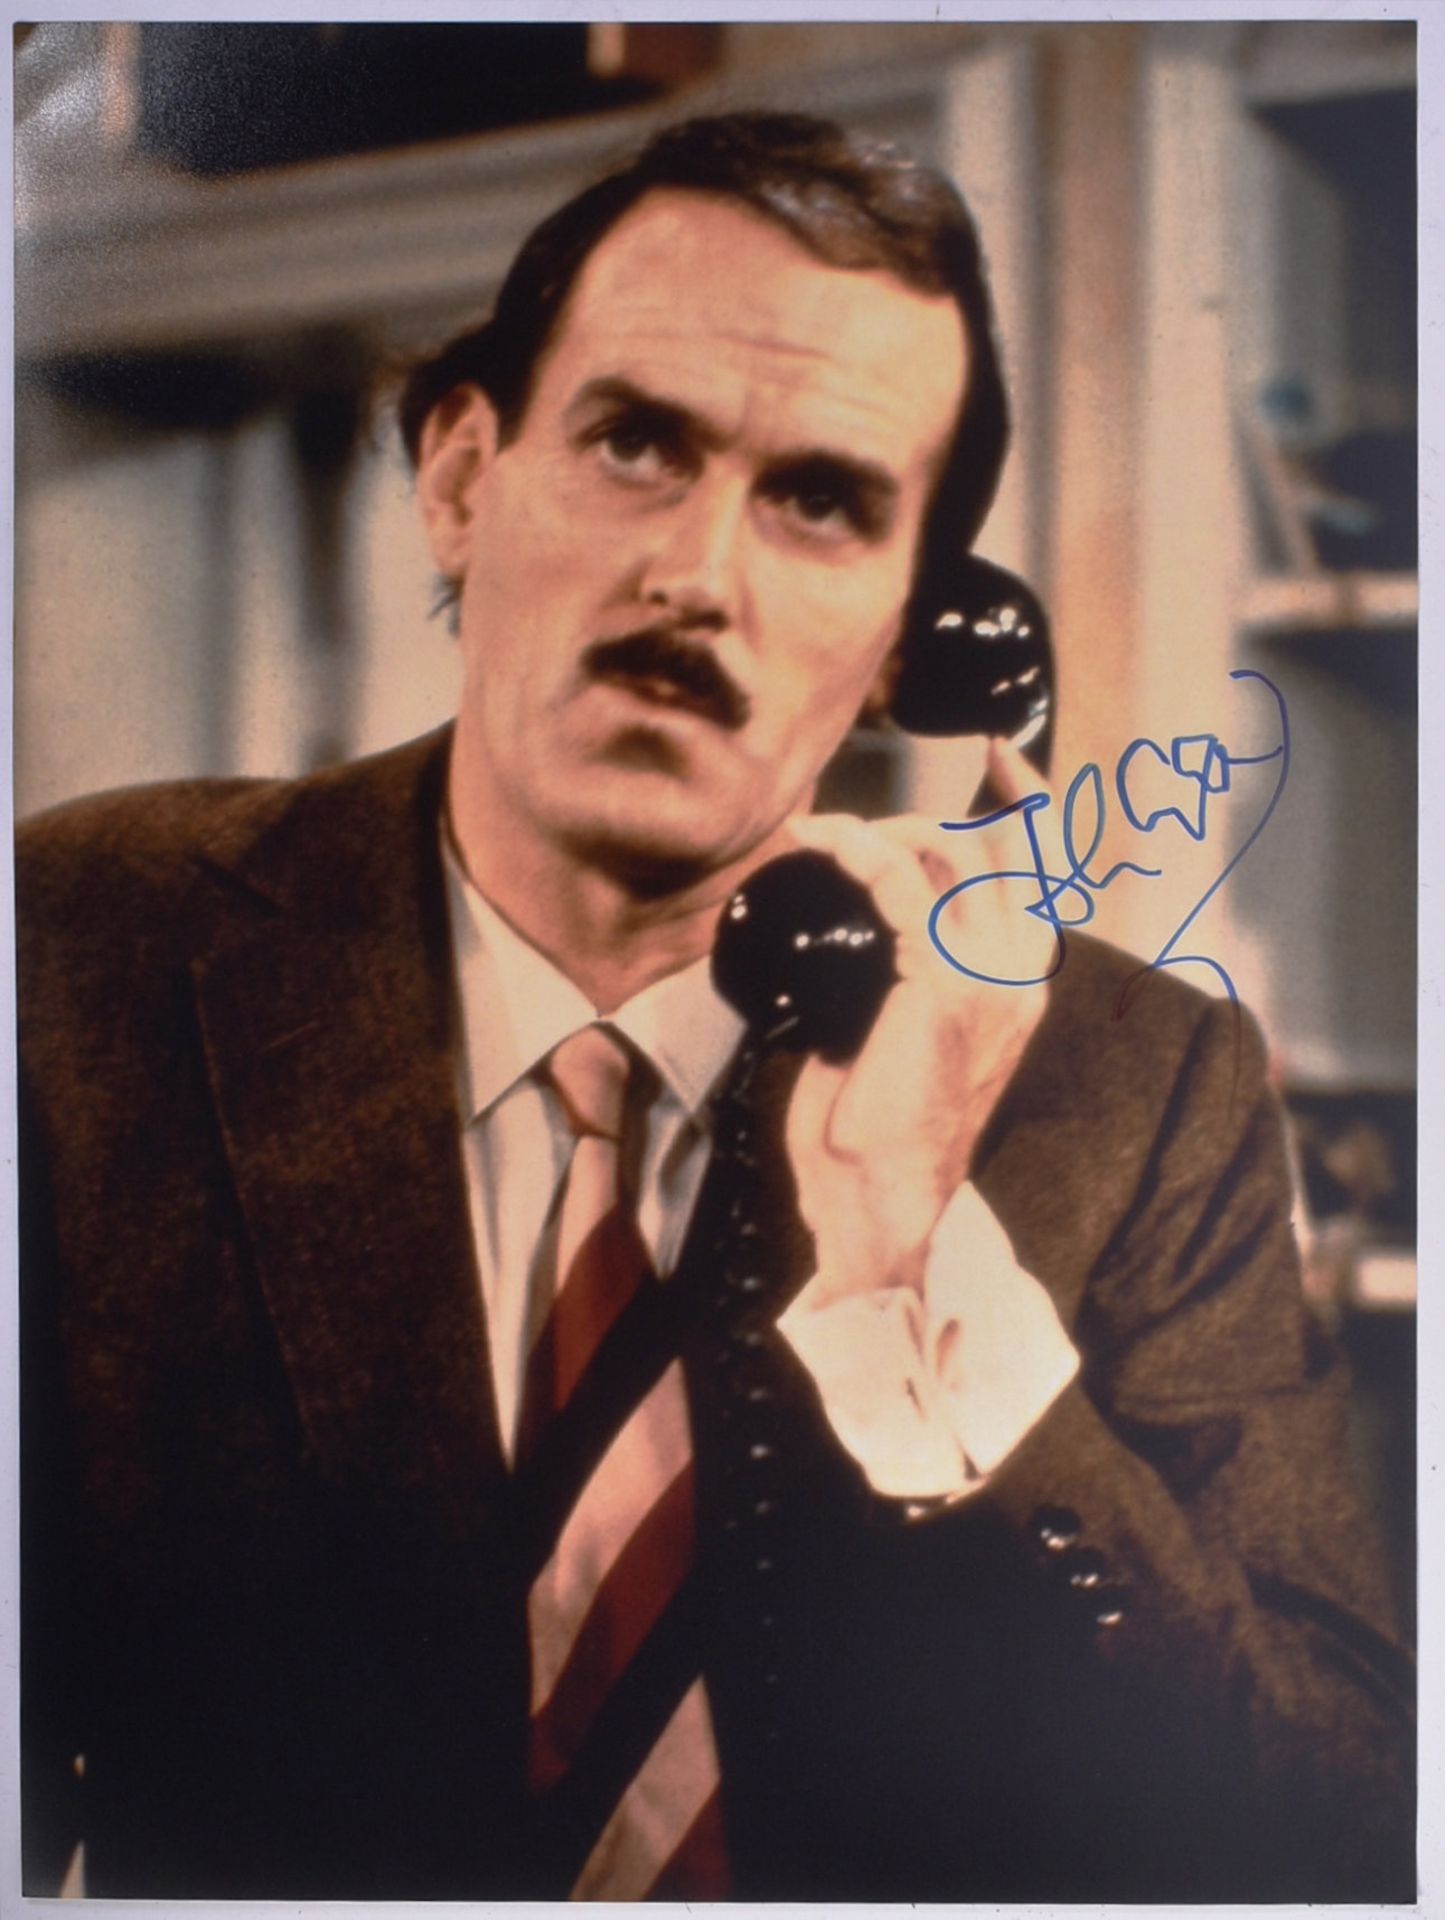 FAWLTY TOWERS - JOHN CLEESE - 16X12" LARGE AUTOGRAPHED PHOTO